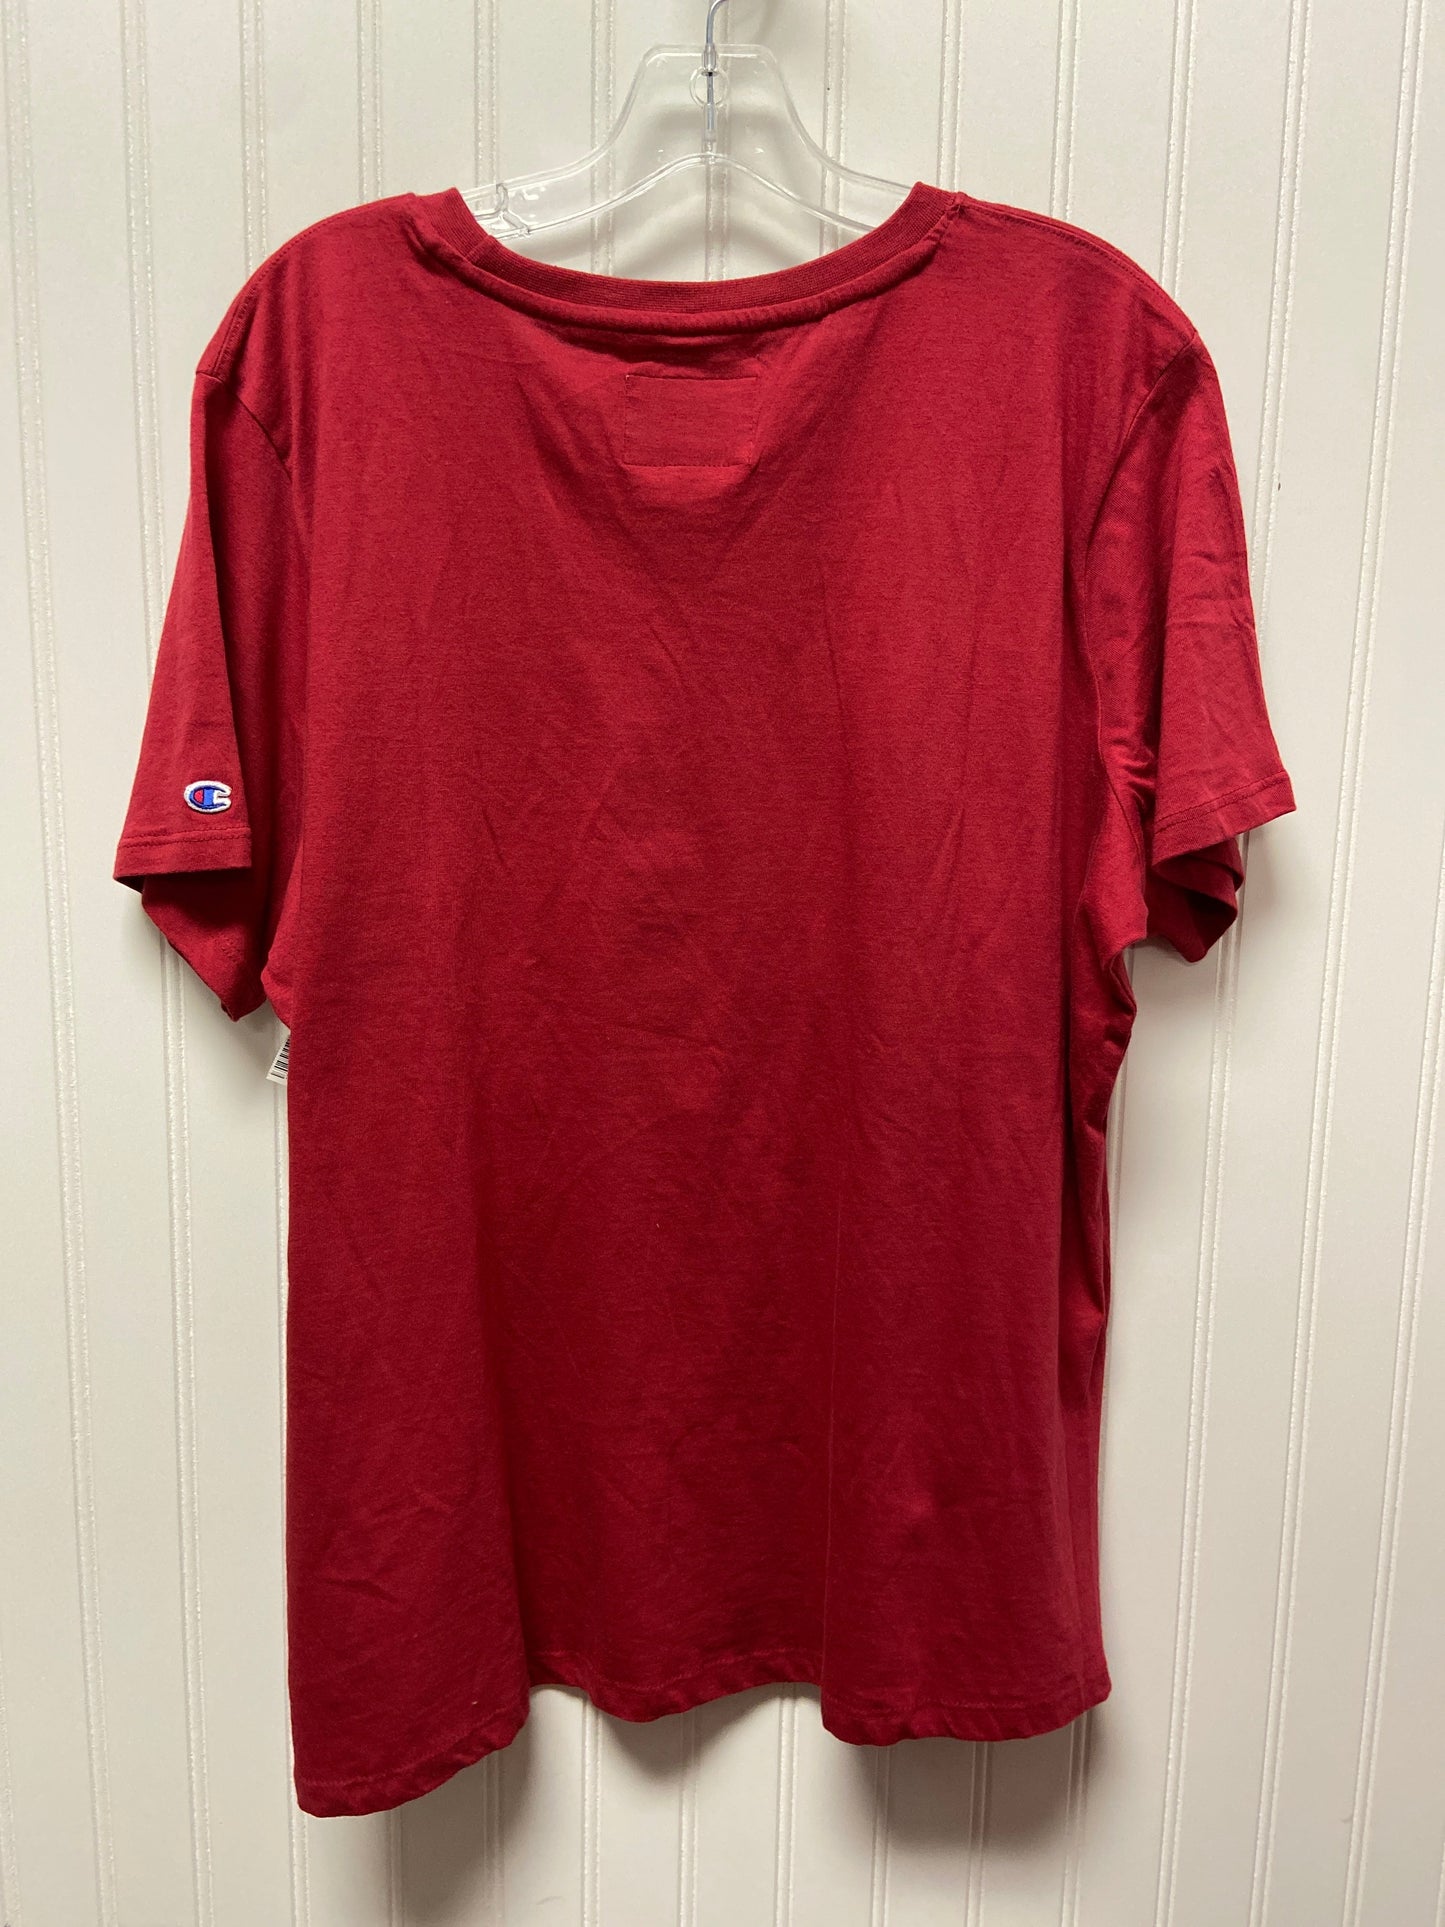 Red Top Short Sleeve Champion, Size 1x